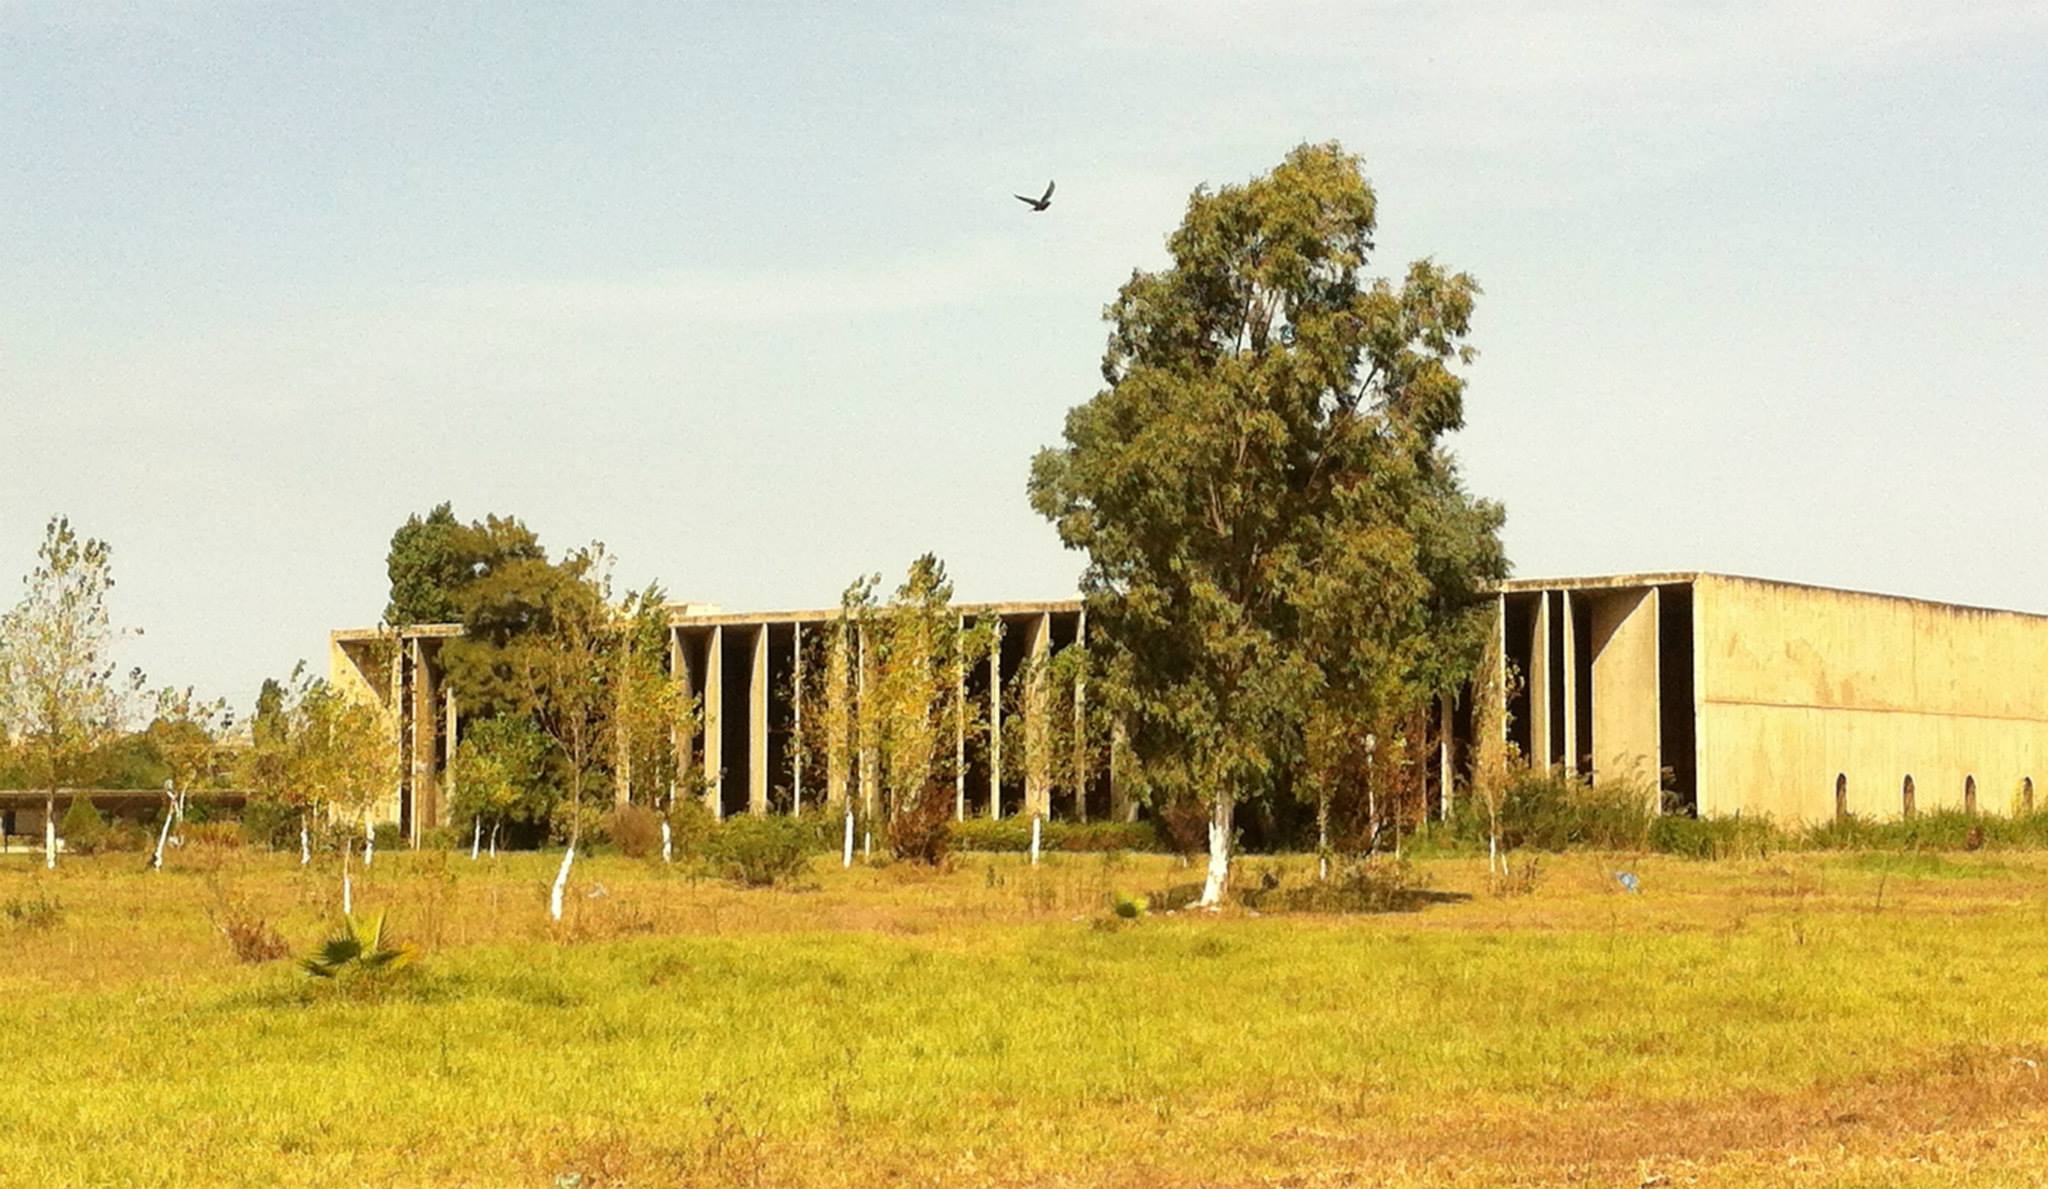 Exterior view of flat topped building from across a grassy area